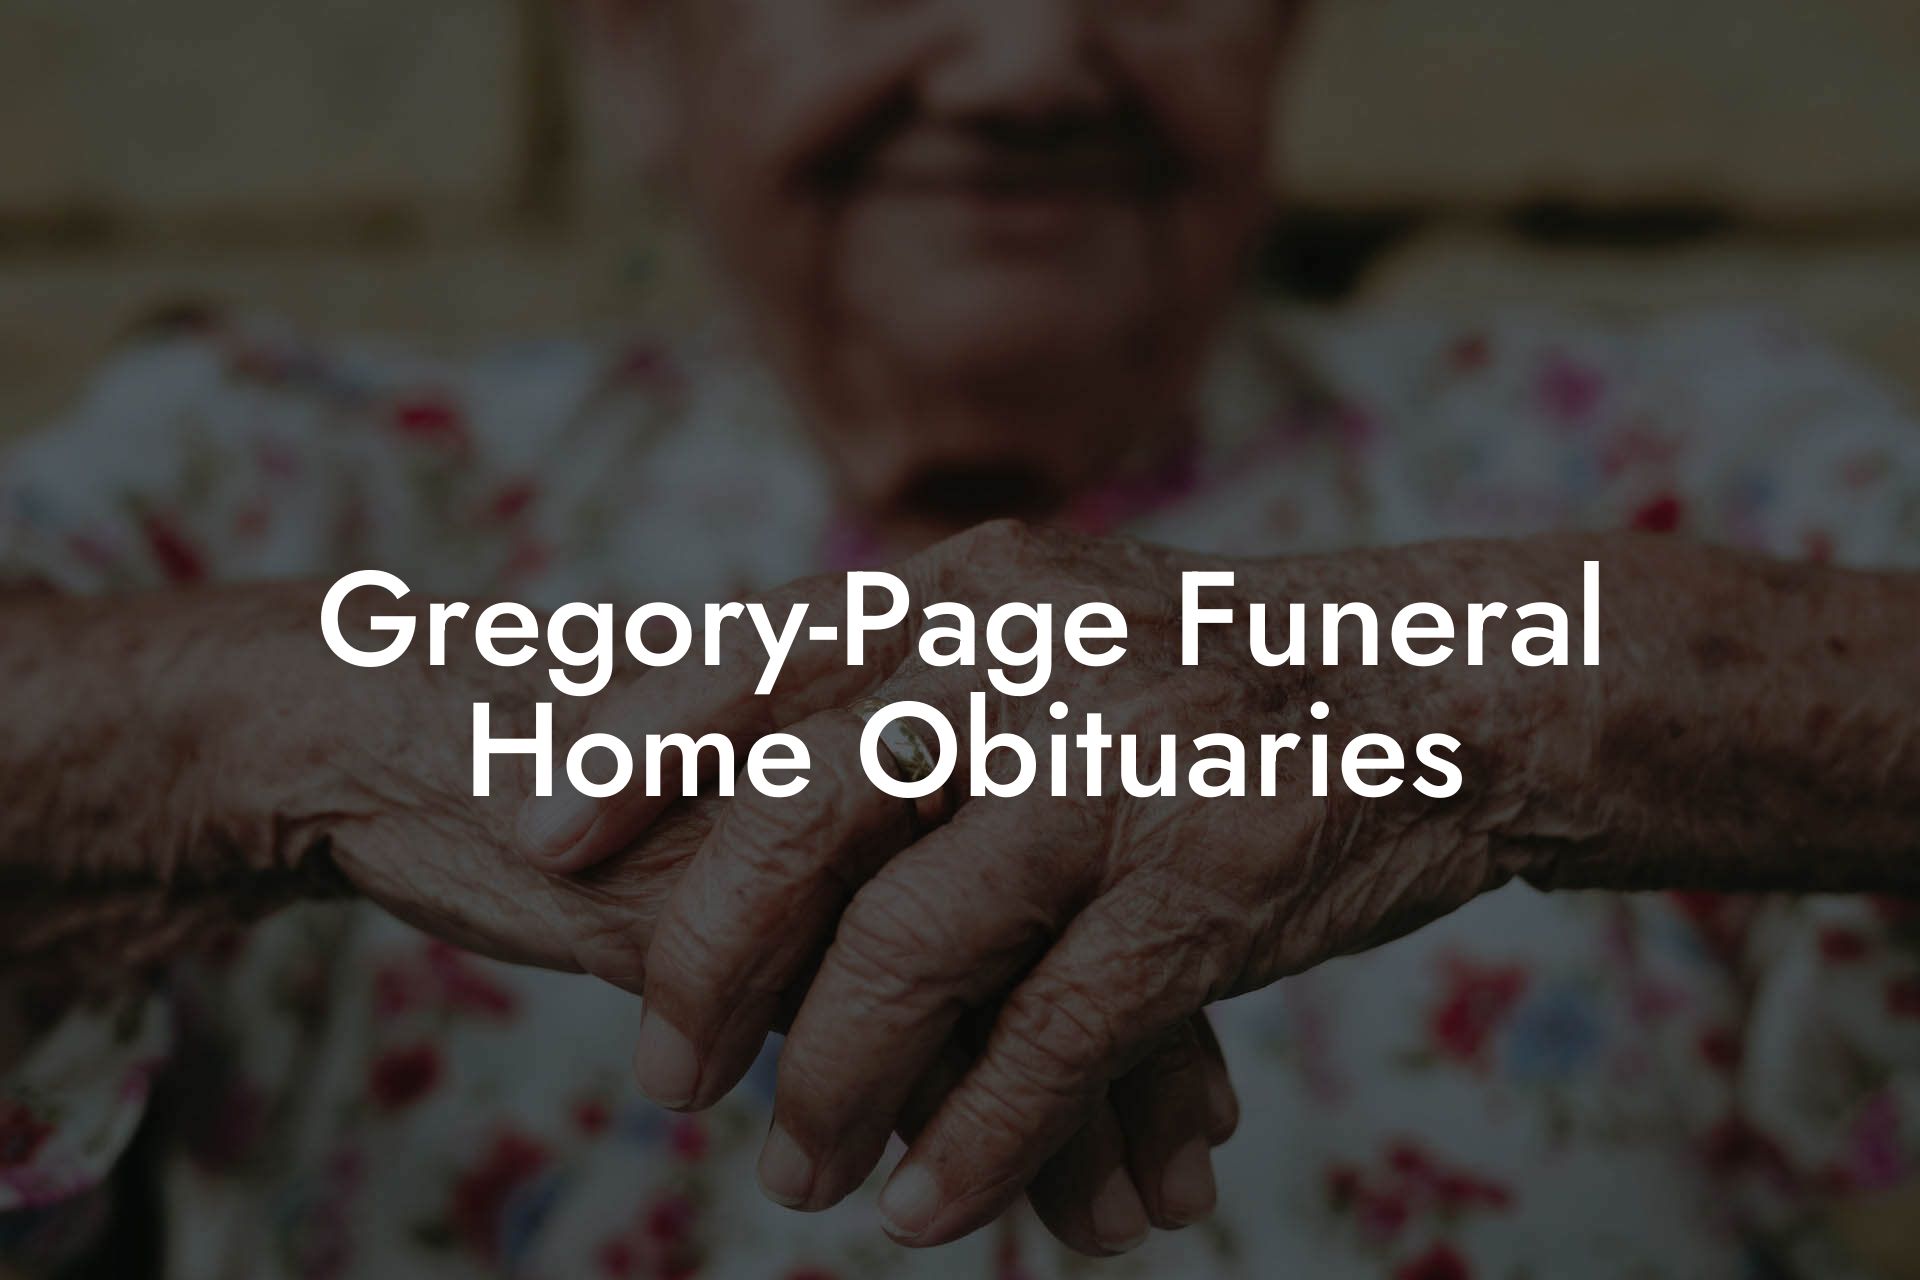 Gregory-Page Funeral Home Obituaries